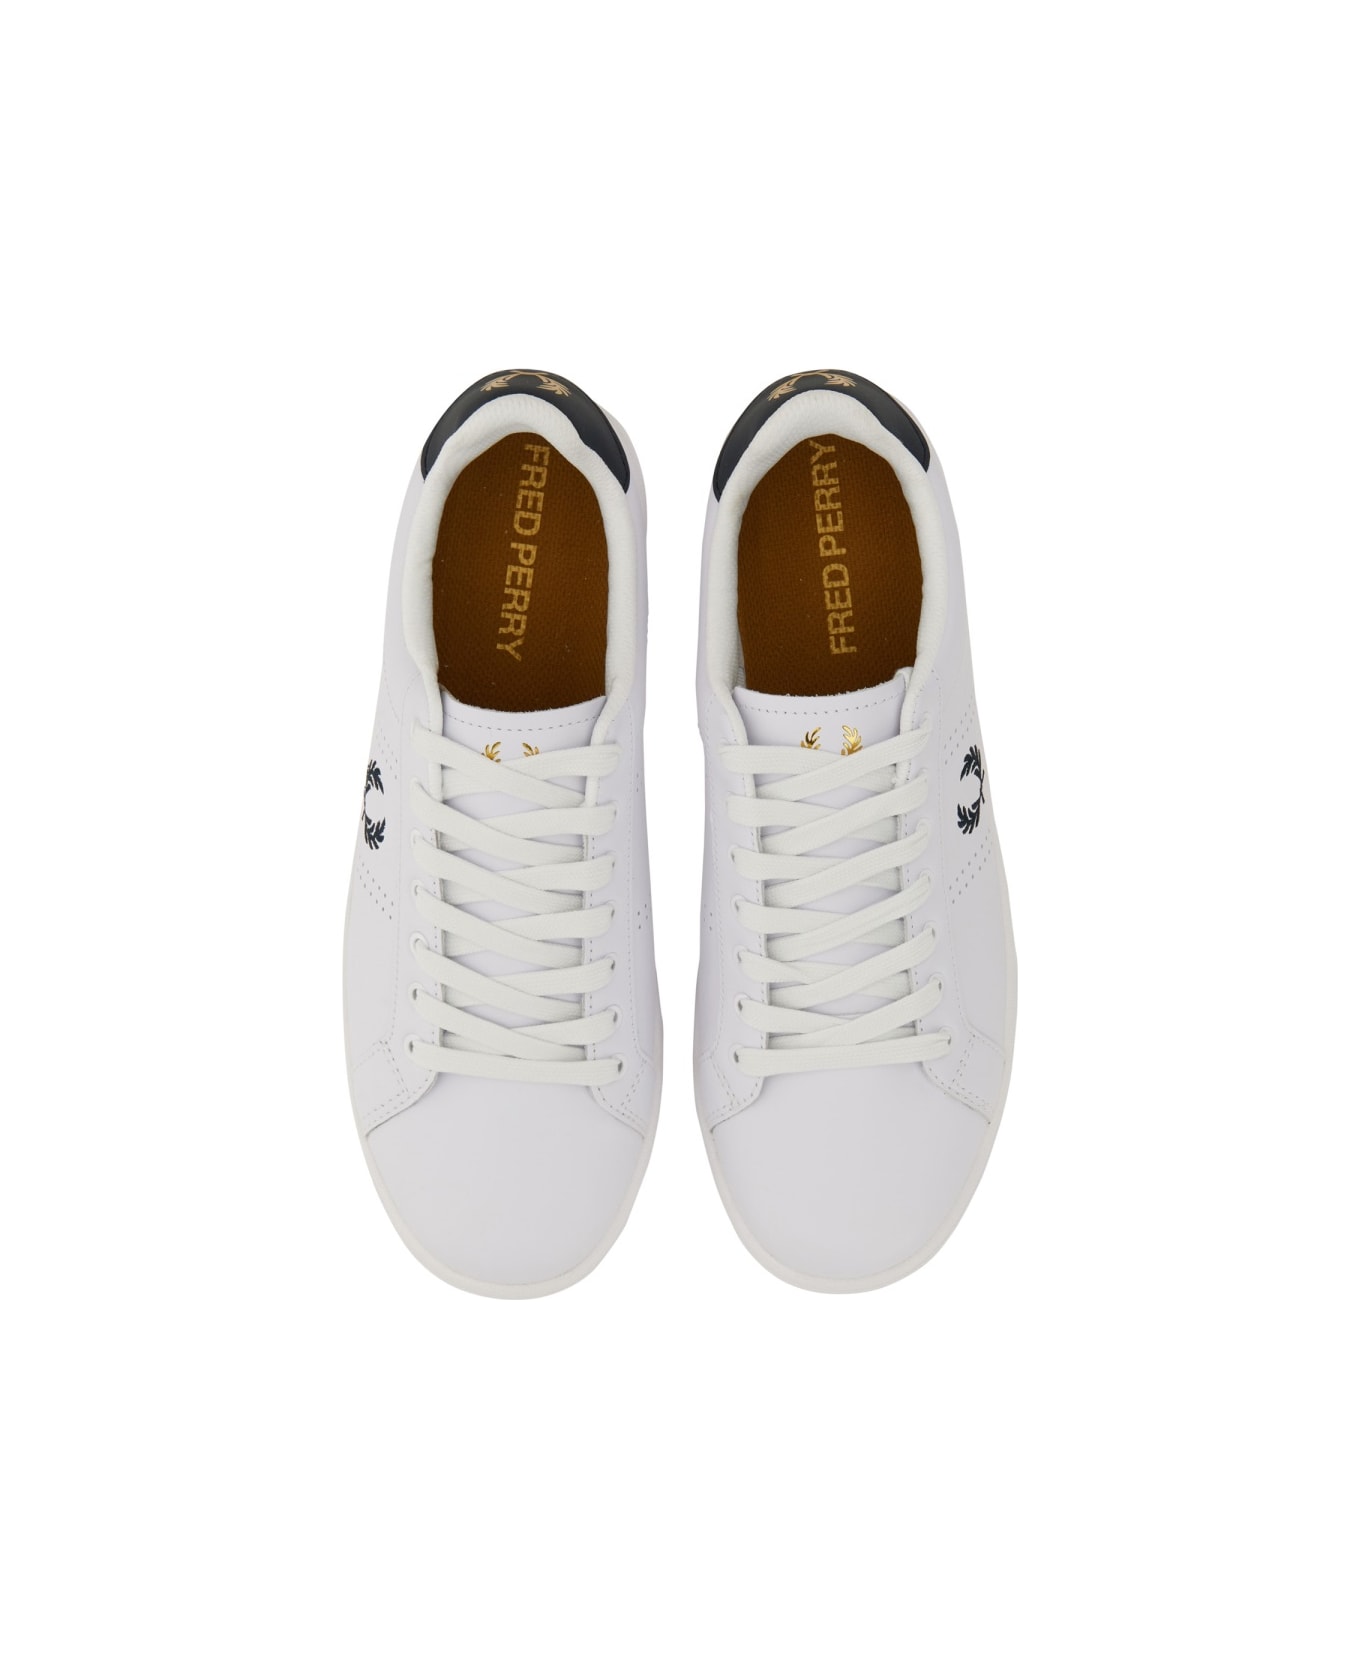 Fred Perry Sneaker "b721" - WHITE スニーカー